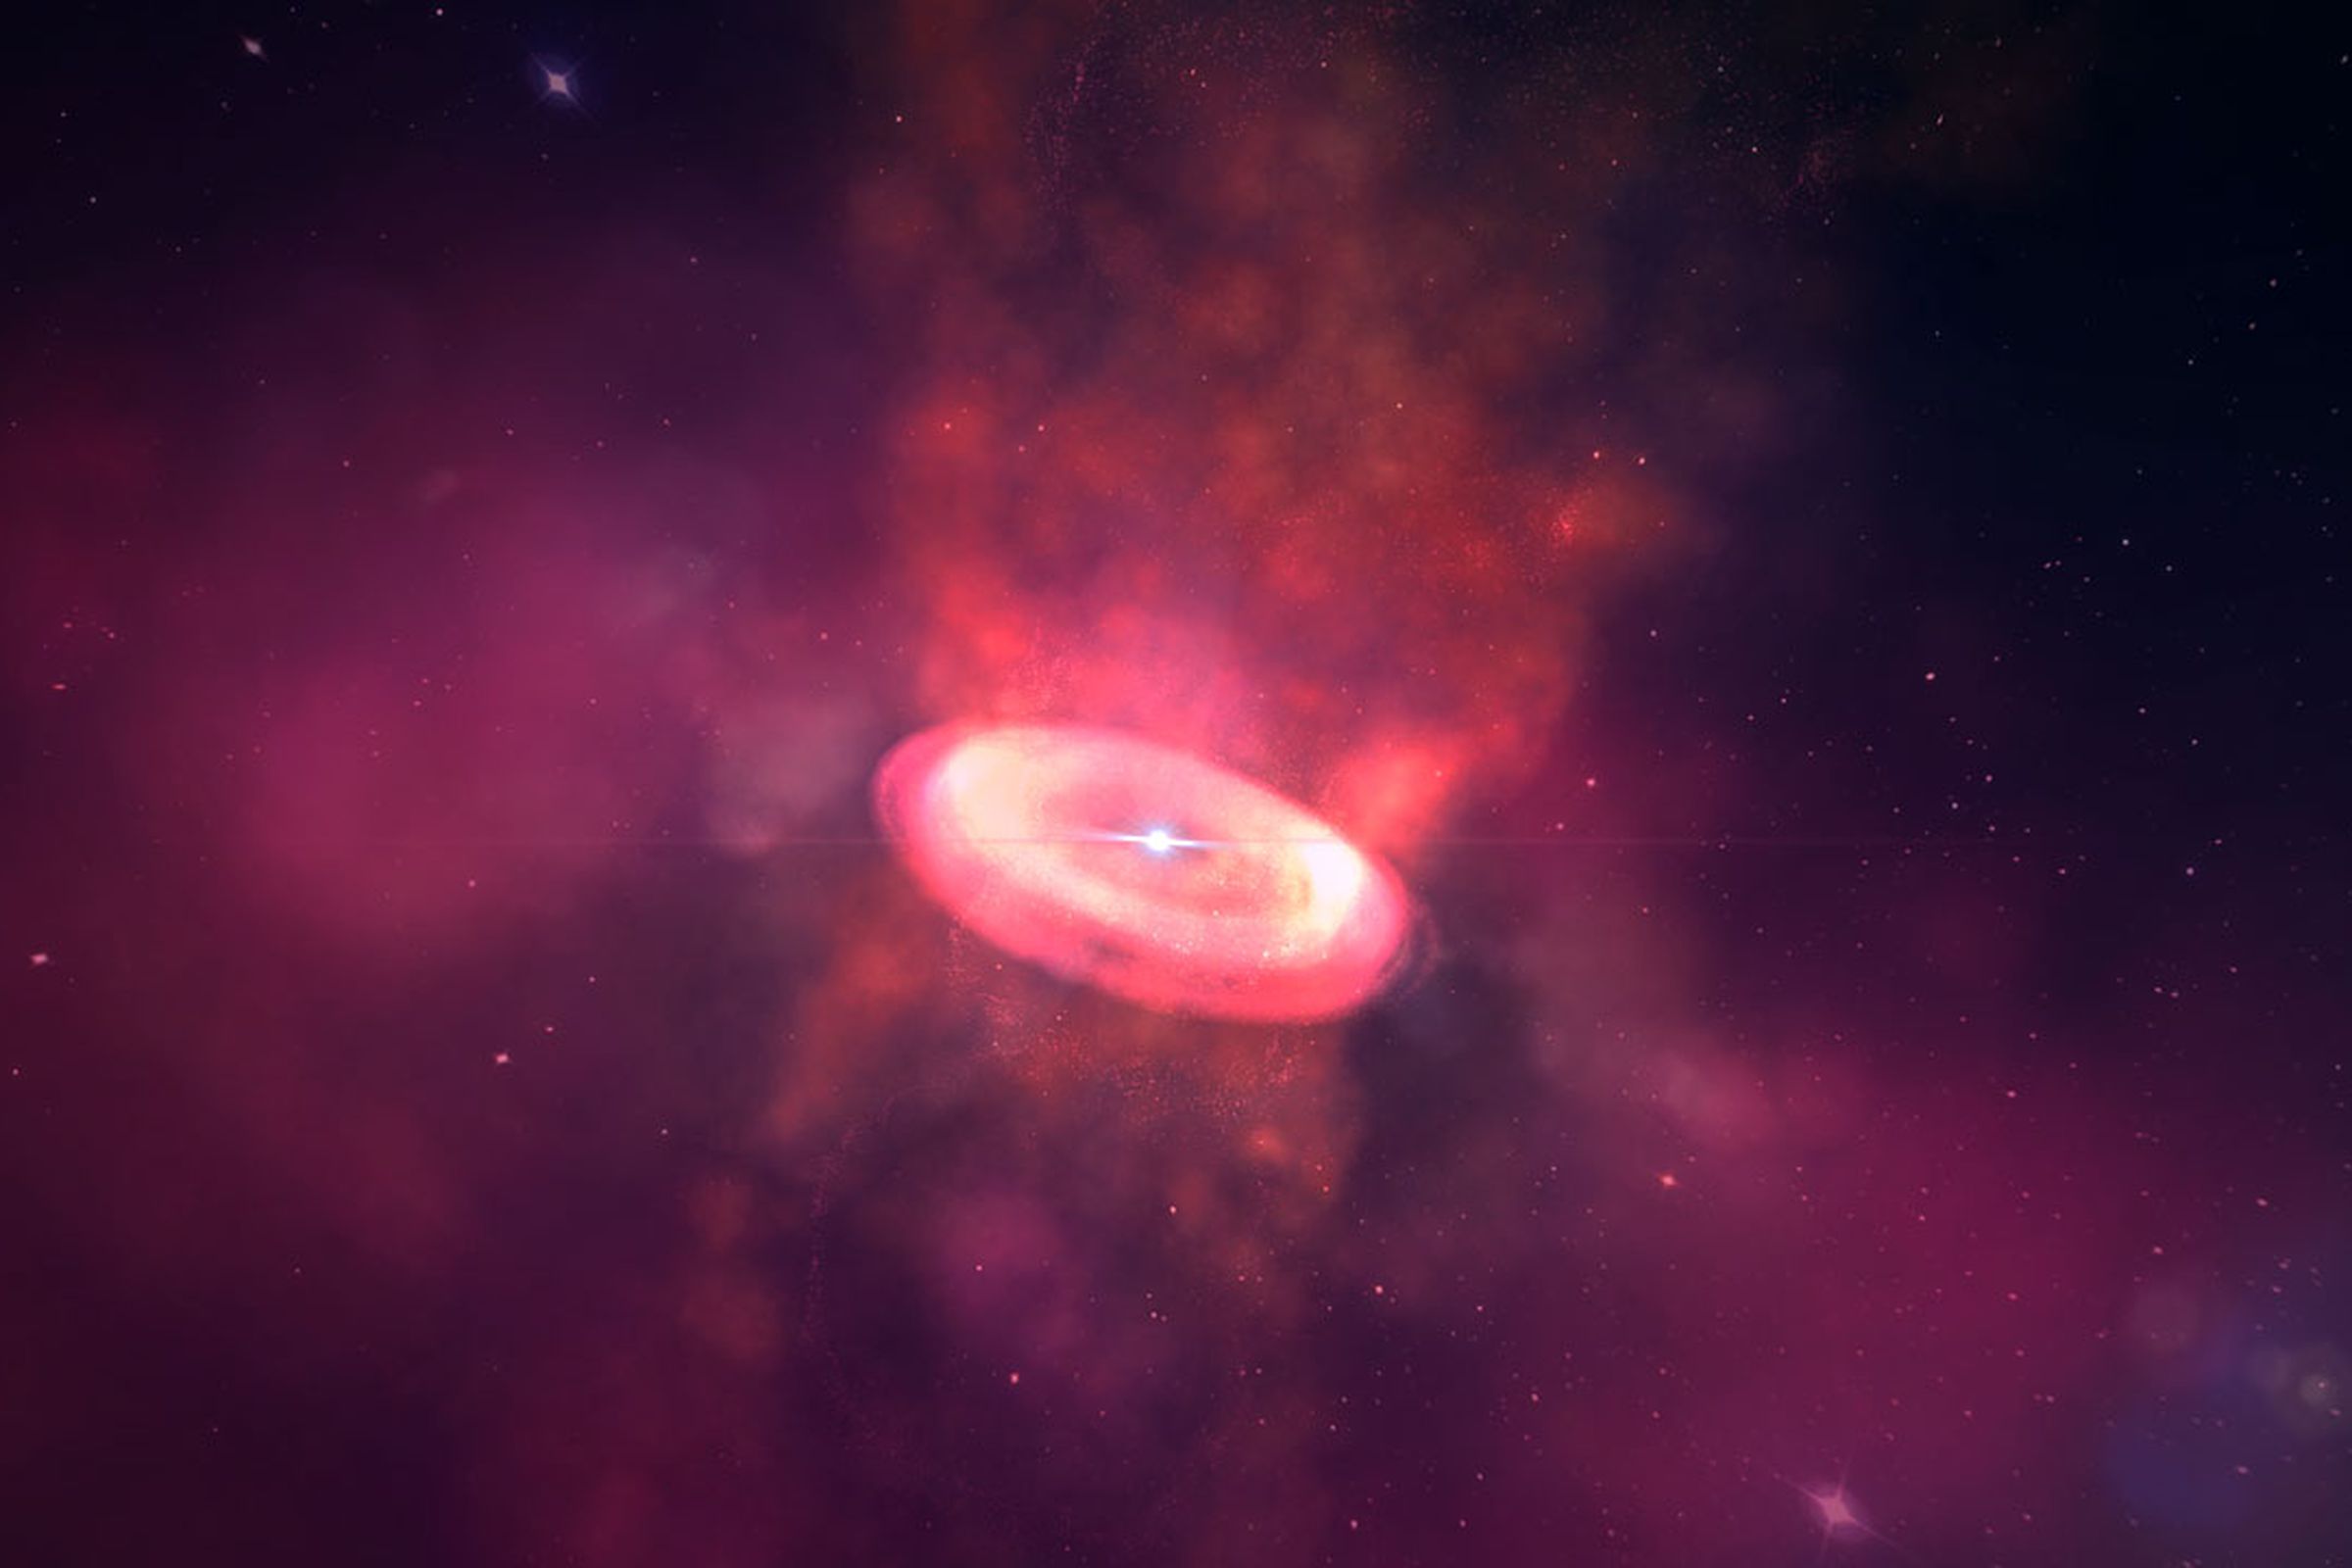 Artist impression of the protostar’s whirlwind 